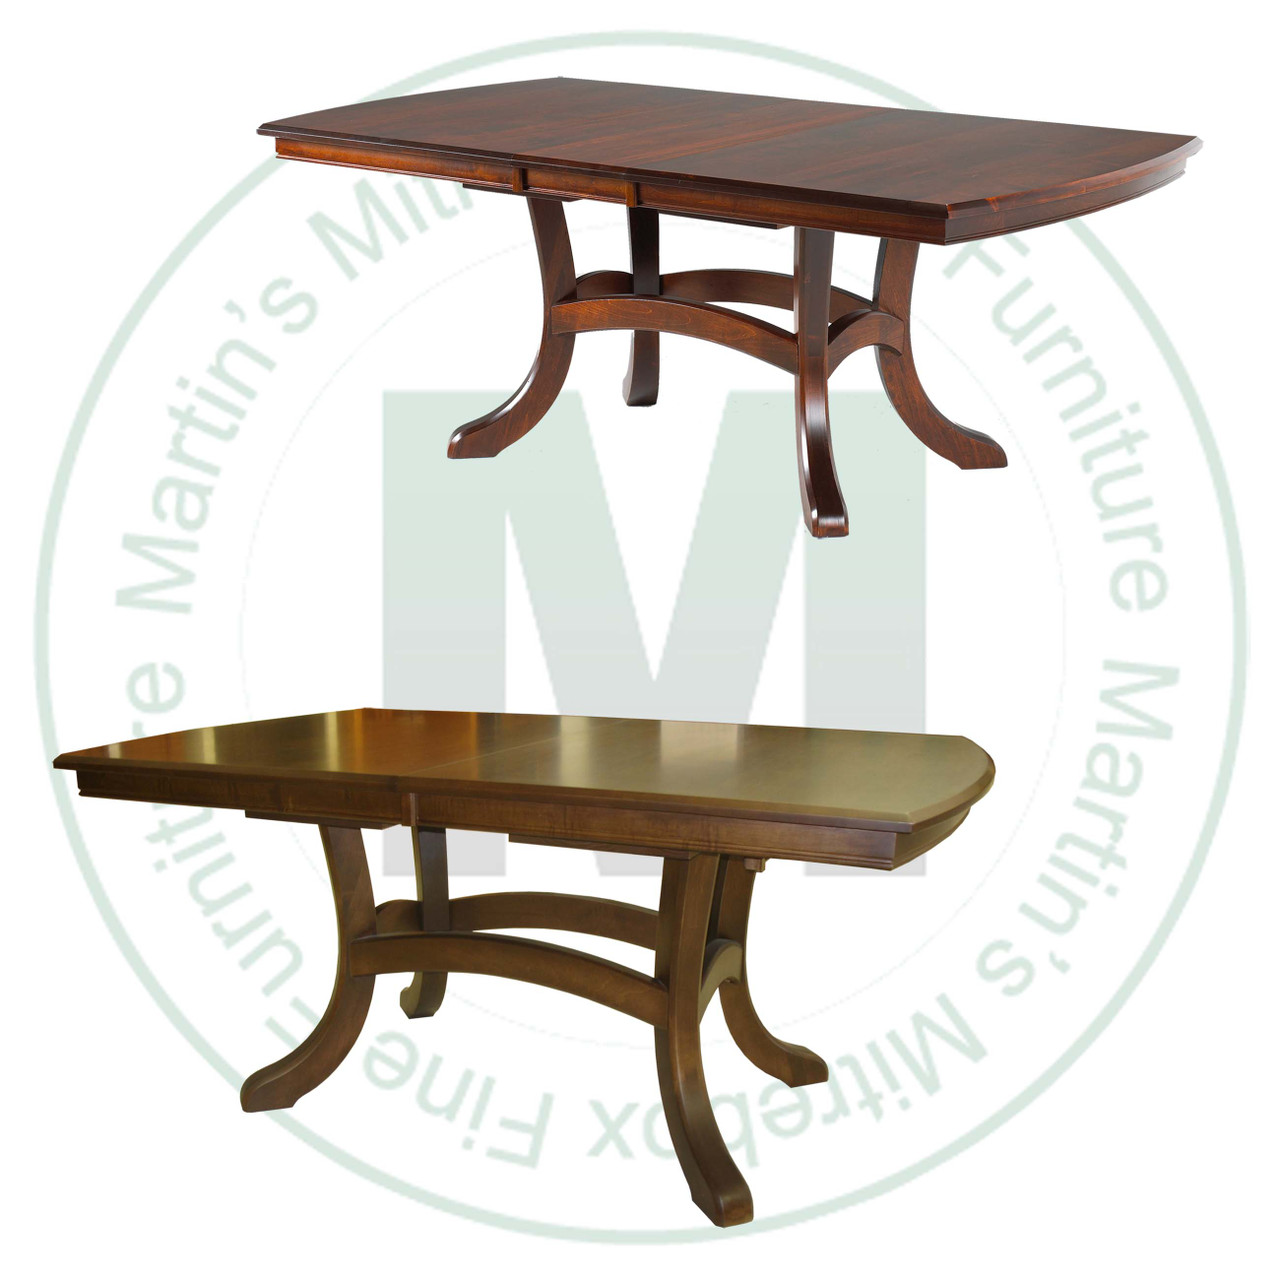 Oak Jordan Double Pedestal Table 54''D x 72''W x 30''H With 3 - 12'' Leaves. Table Has 1.25'' Thick Top